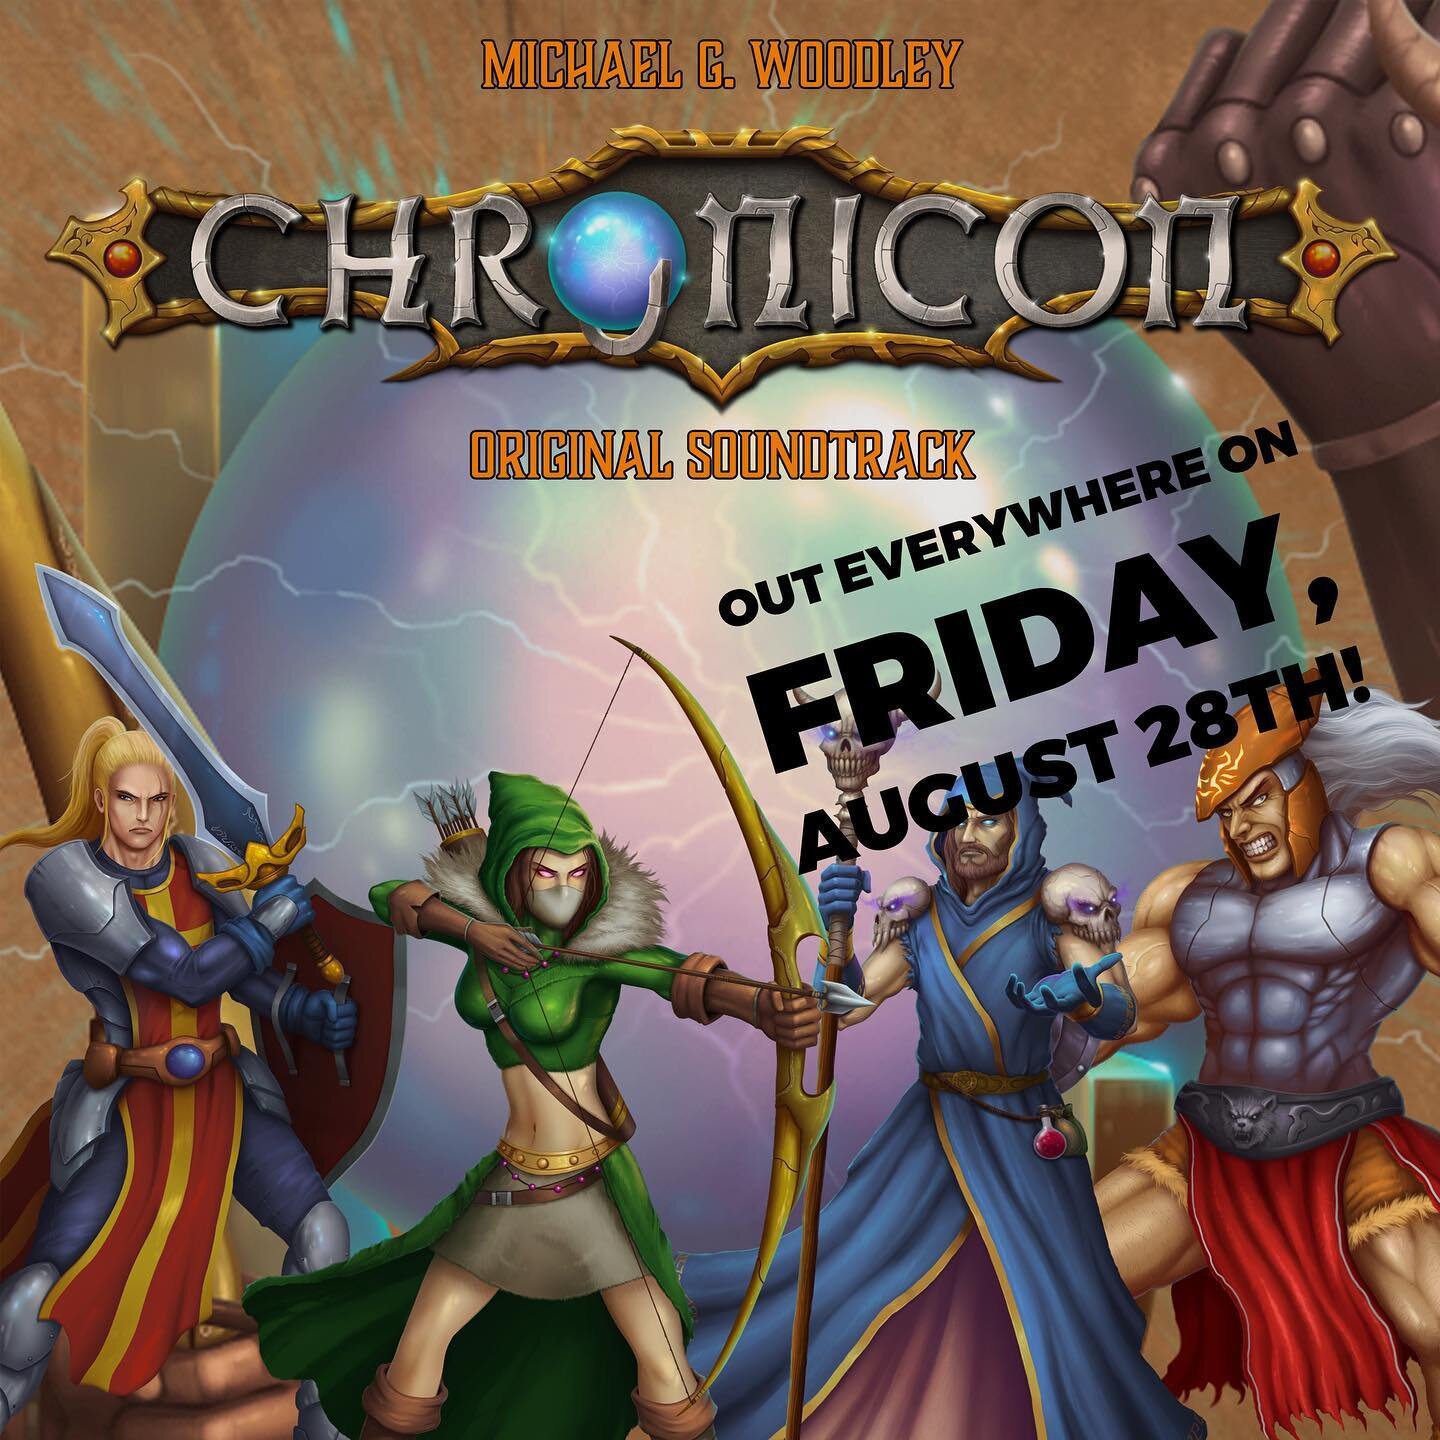 /// SOUNDTRACK /// The OST for Chronicon will be released everywhere on Friday August 28th! The game itself will be leaving Early Access on steam and the finished game will be coming out tomorrow, August 21st! There will be special pricing on steam, 